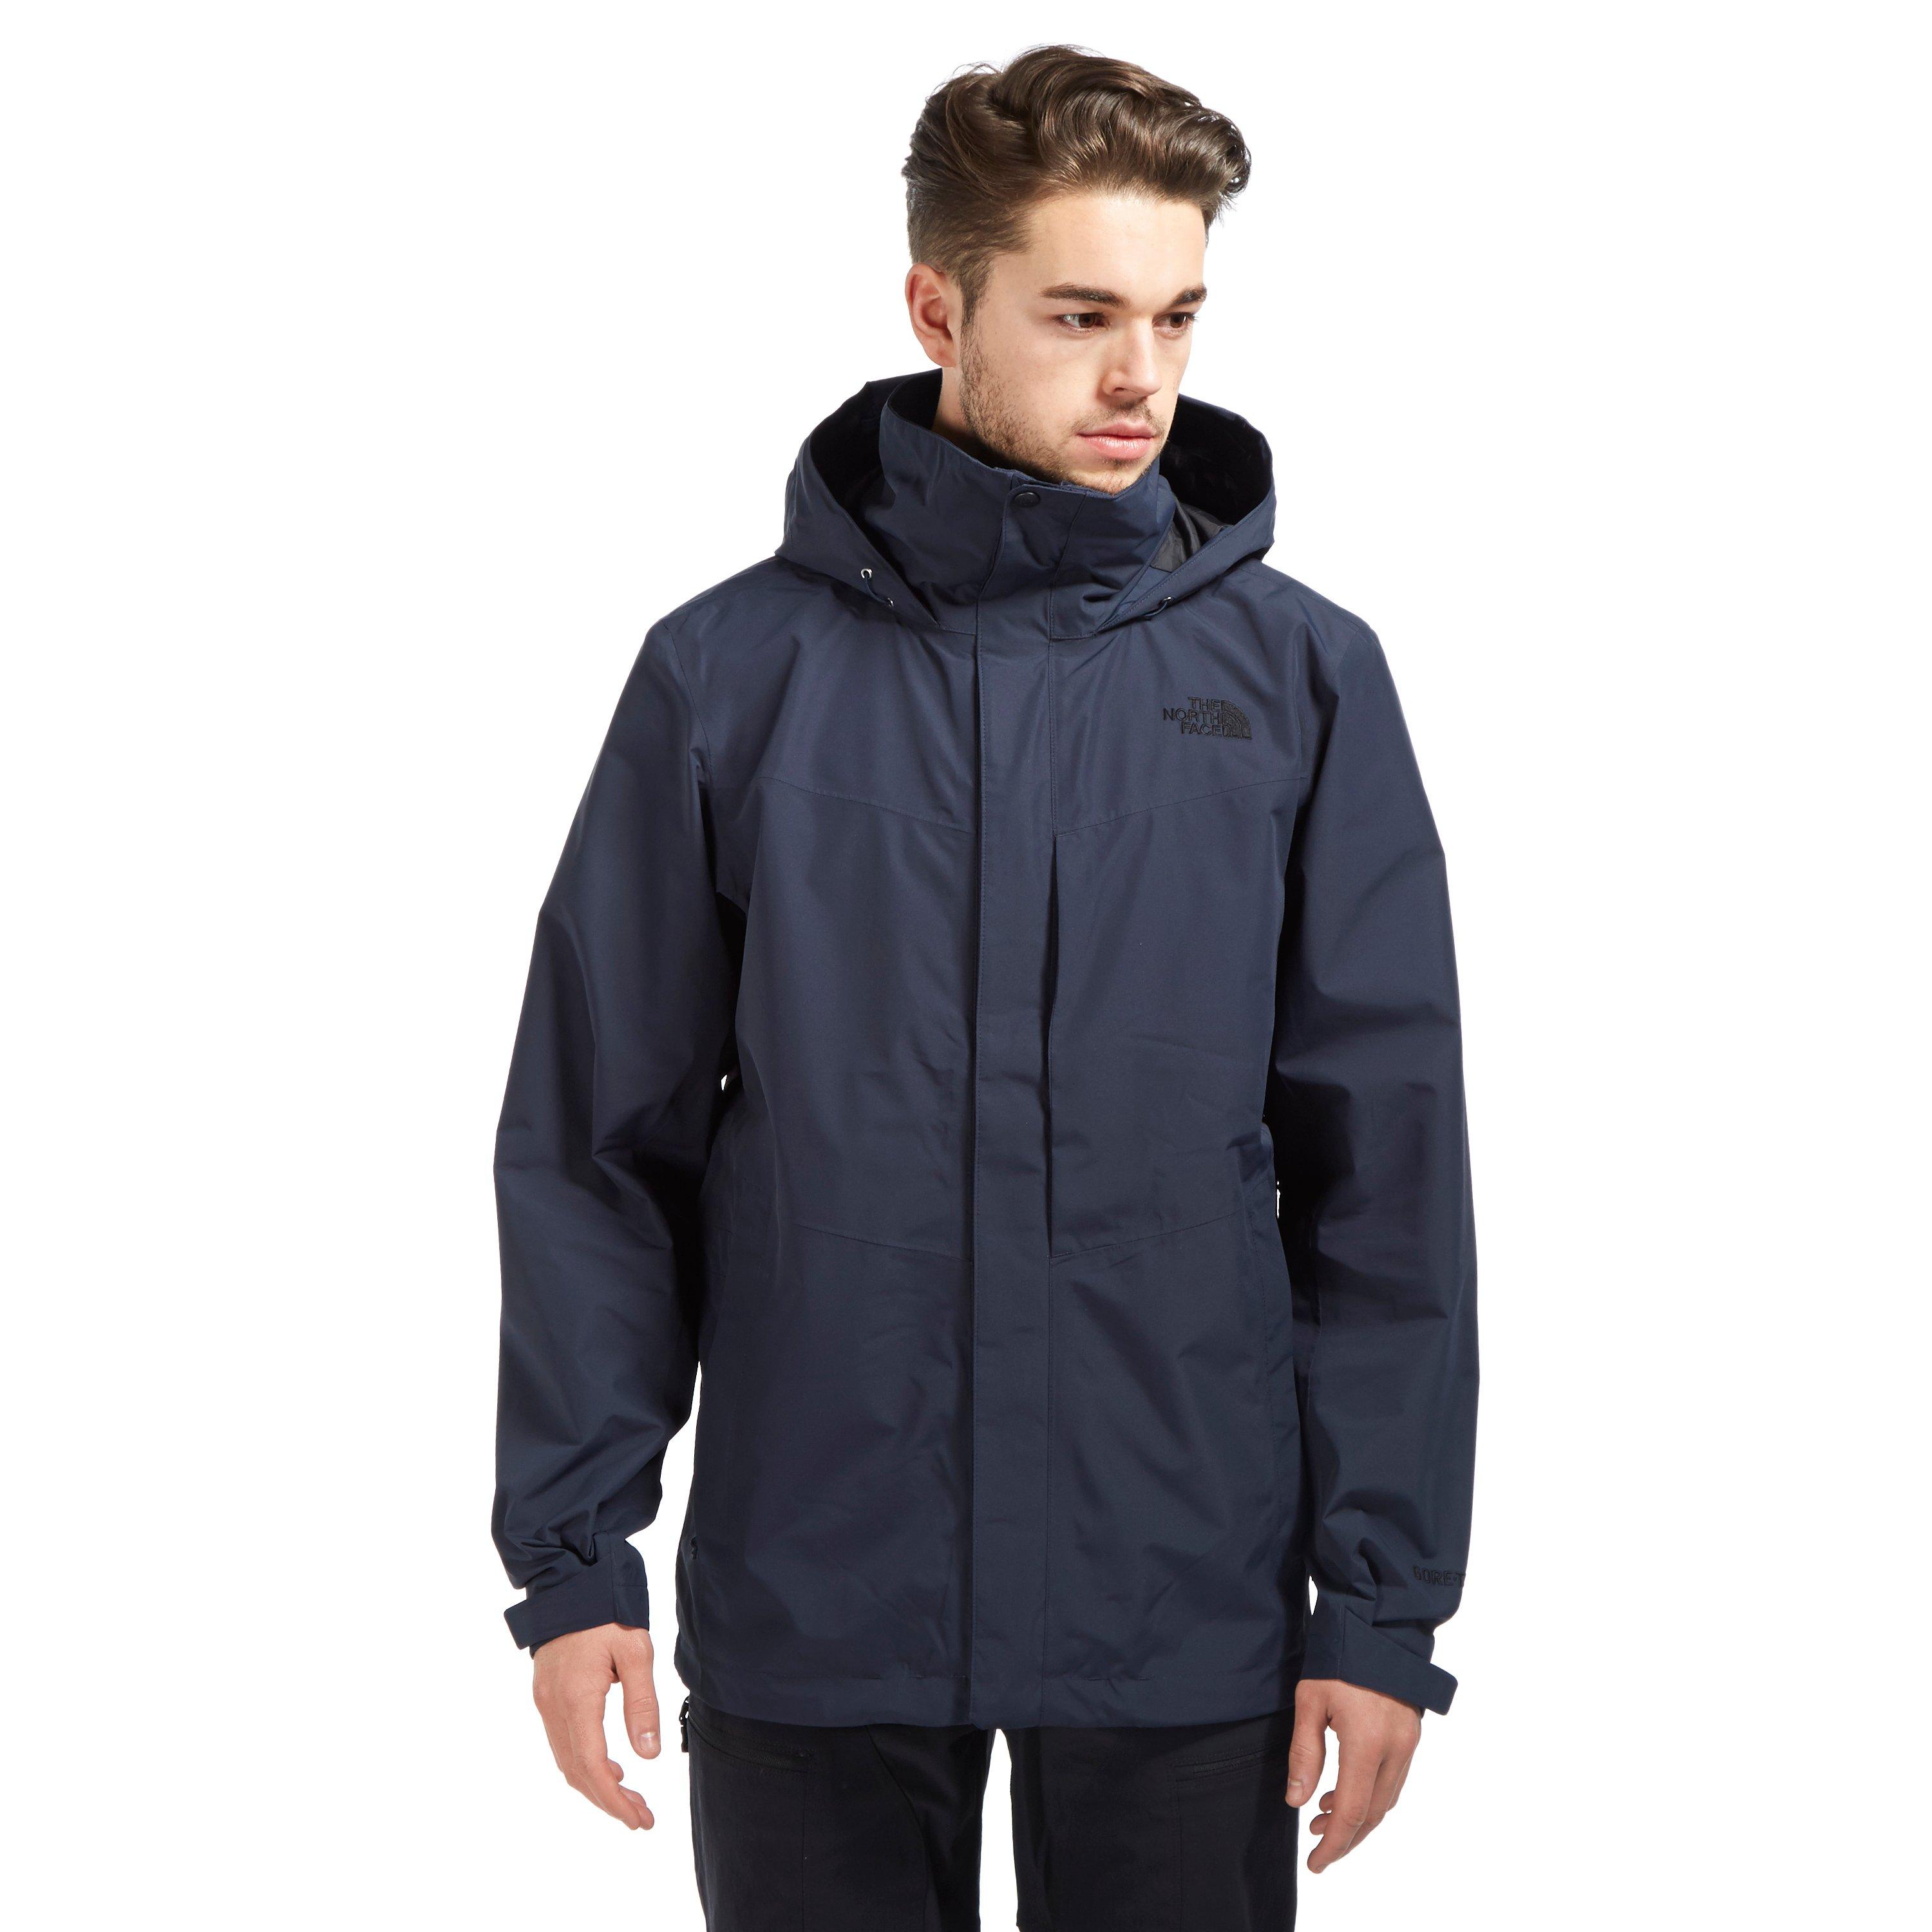 the north face all terrain triclimate jacket gore tex - Marwood ...